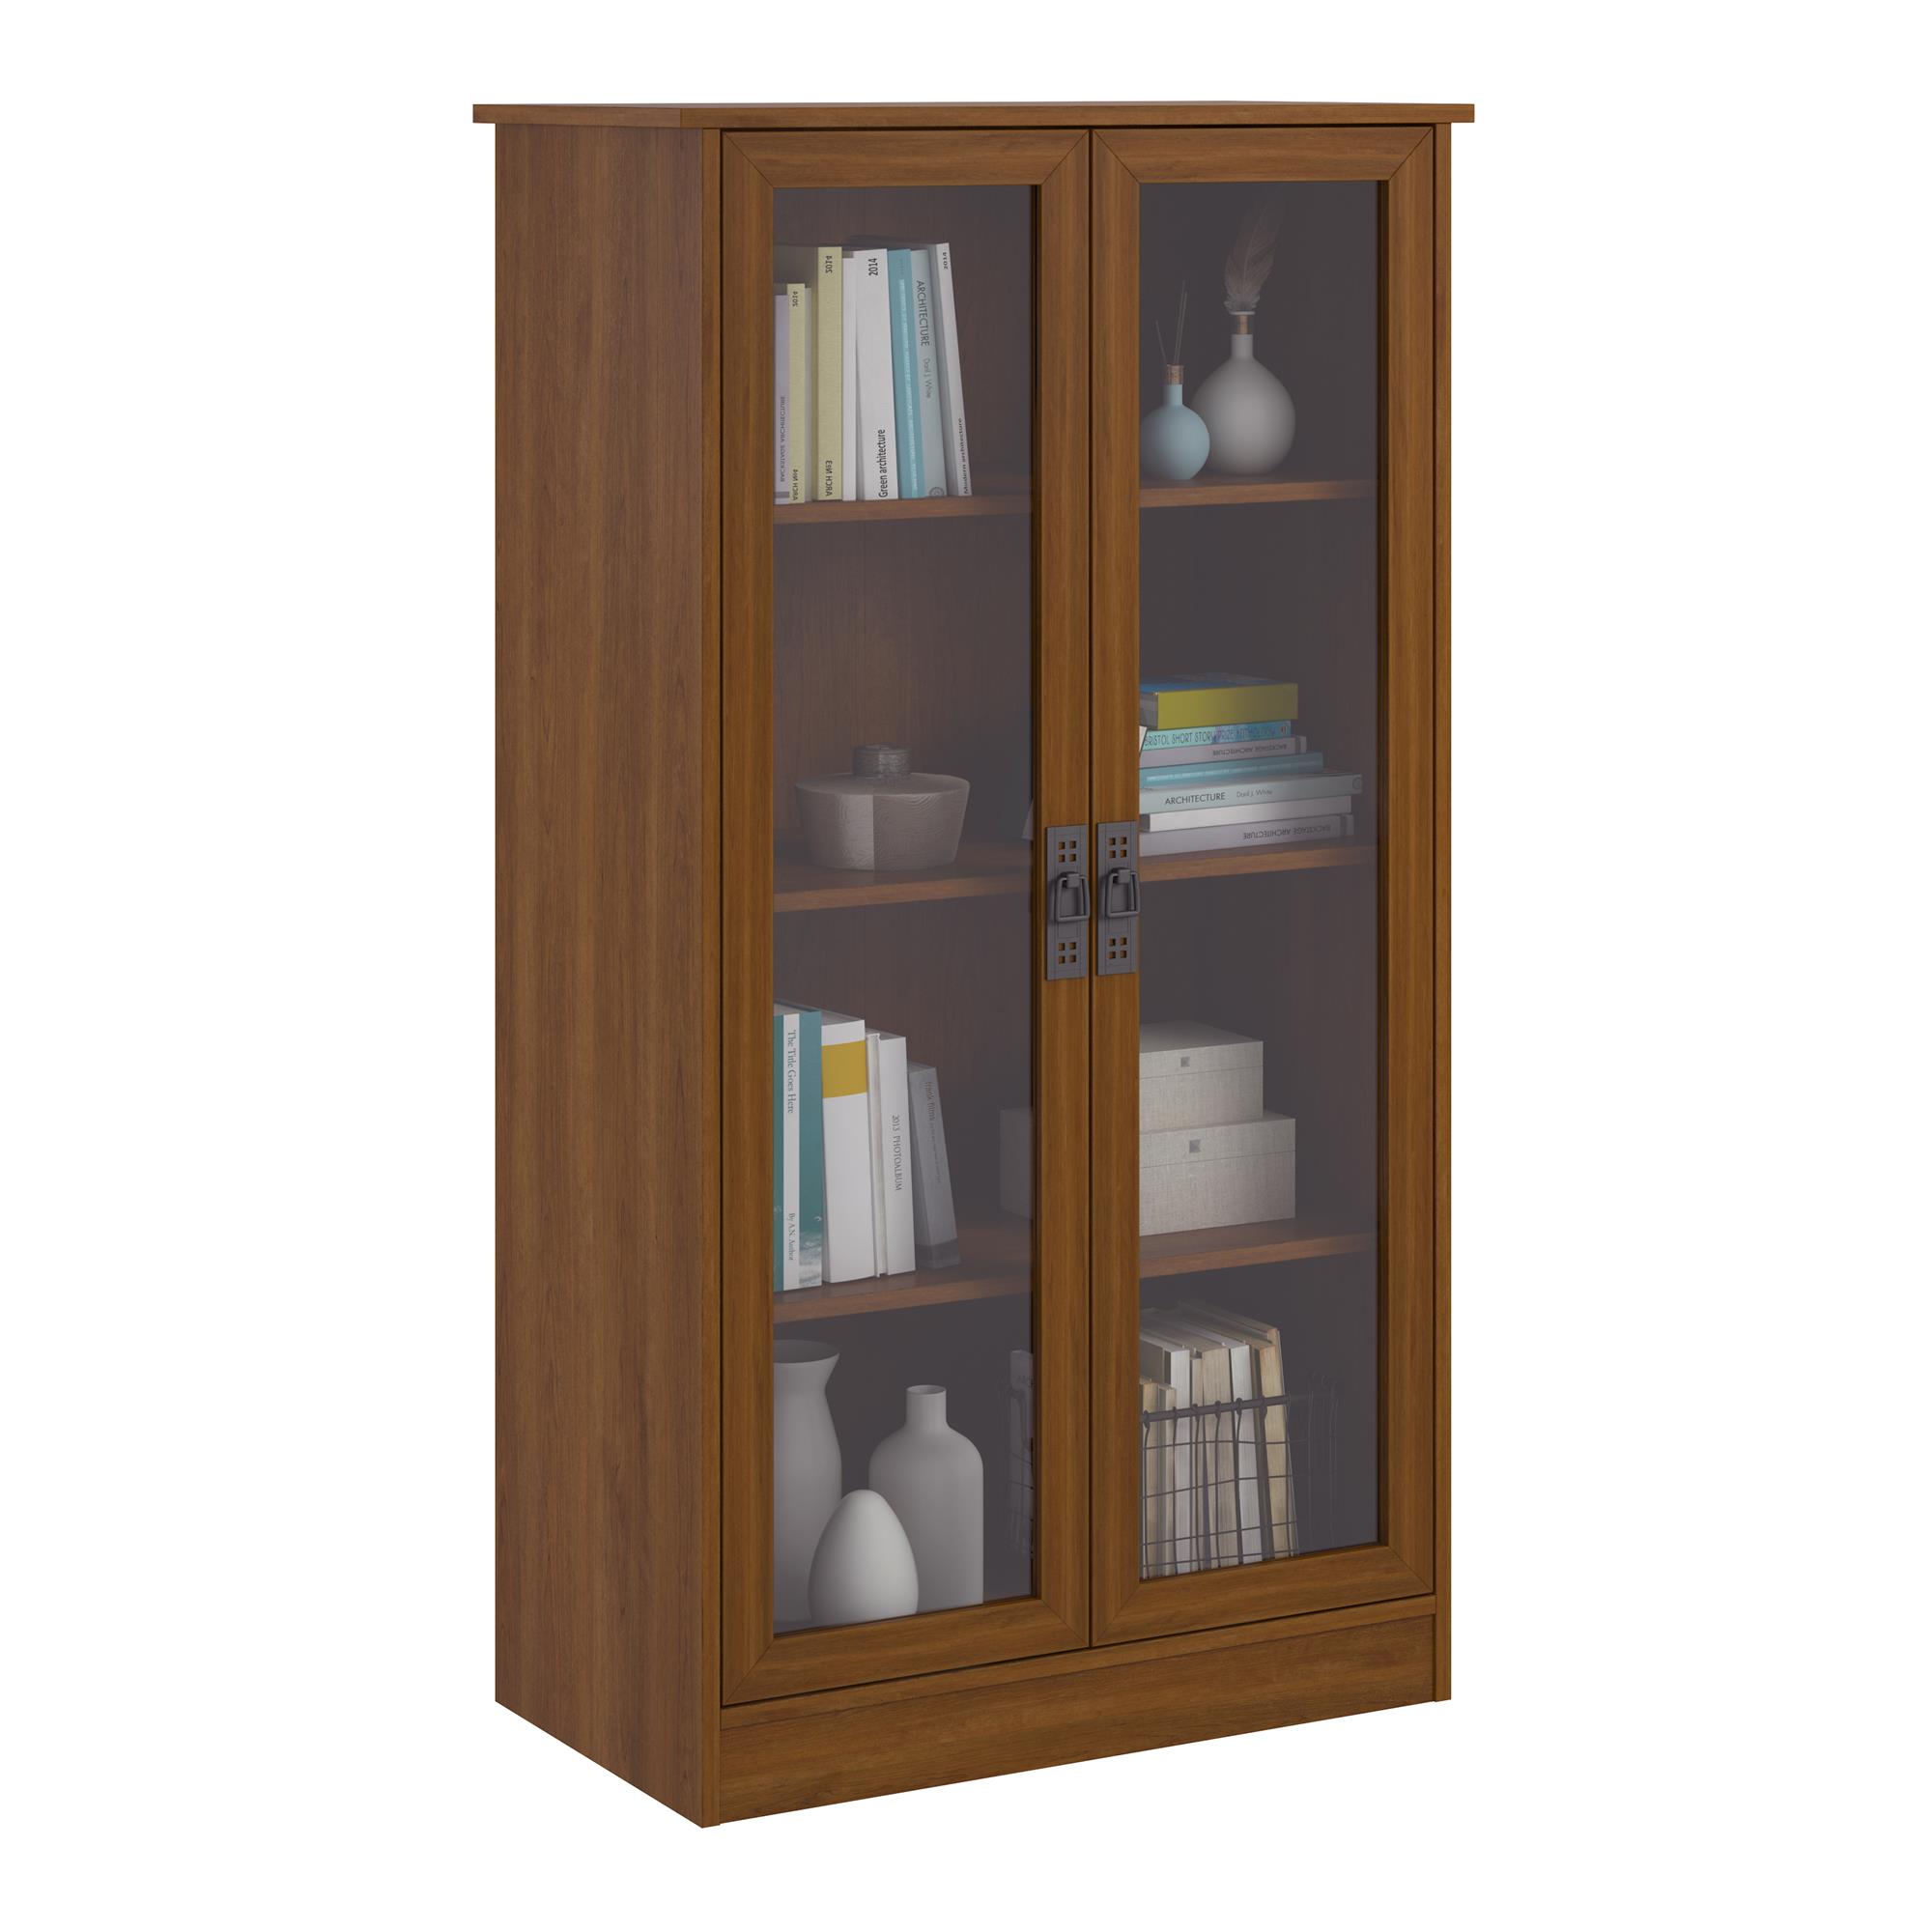 

Heirloom Storage Cabinet Bookshelf with 4 Shelves Multiple Finishes Bookcase with Glass Doors